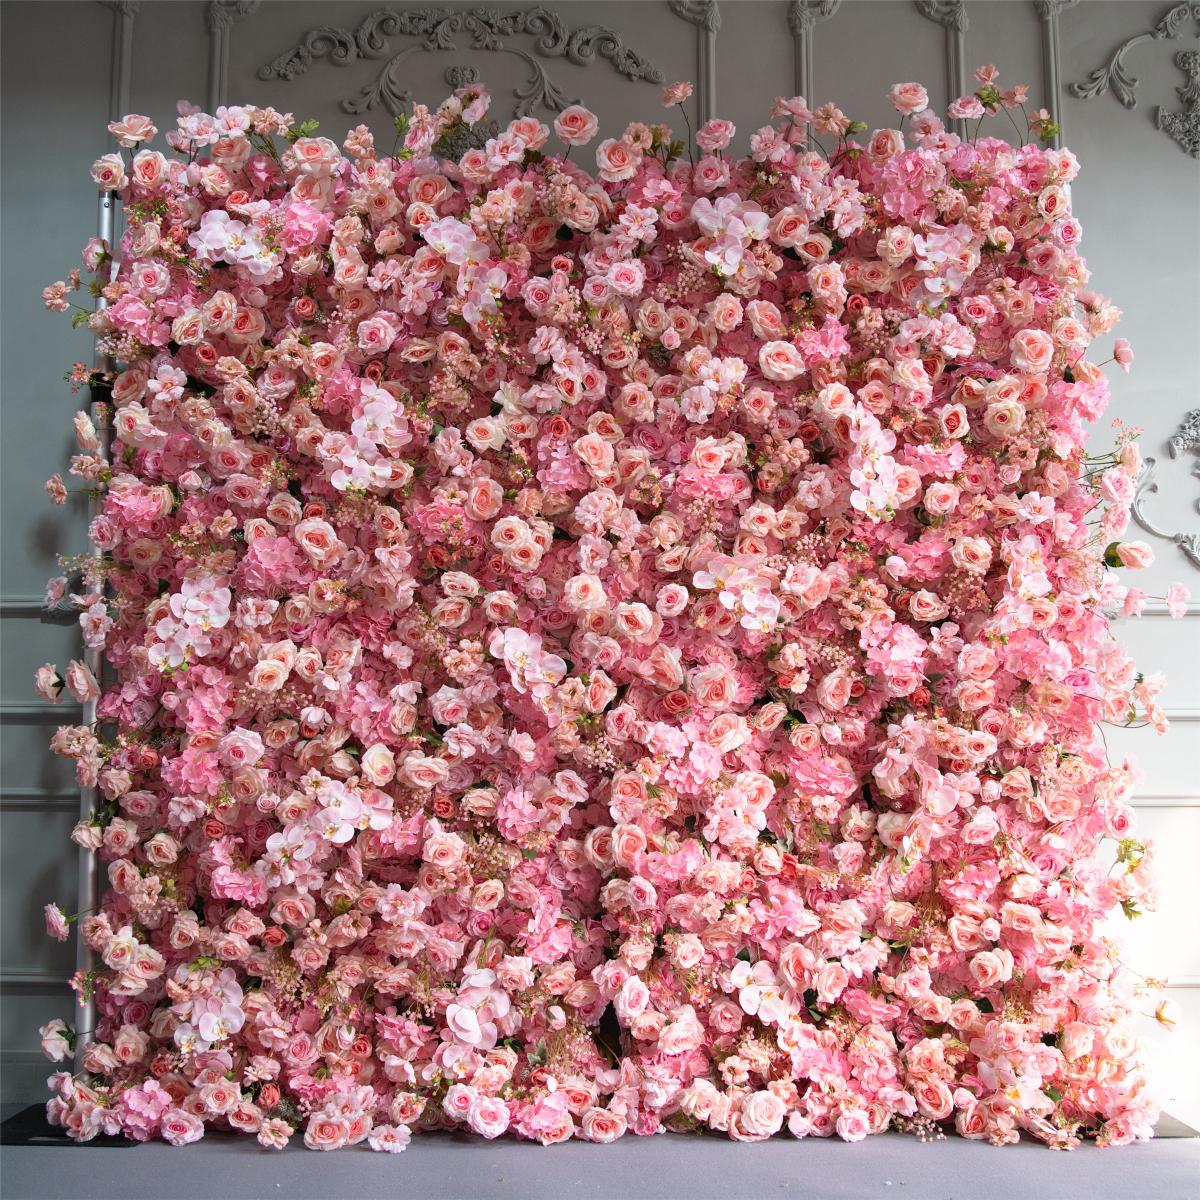 The 5D pink fabric flower wall looks cute and romantic.